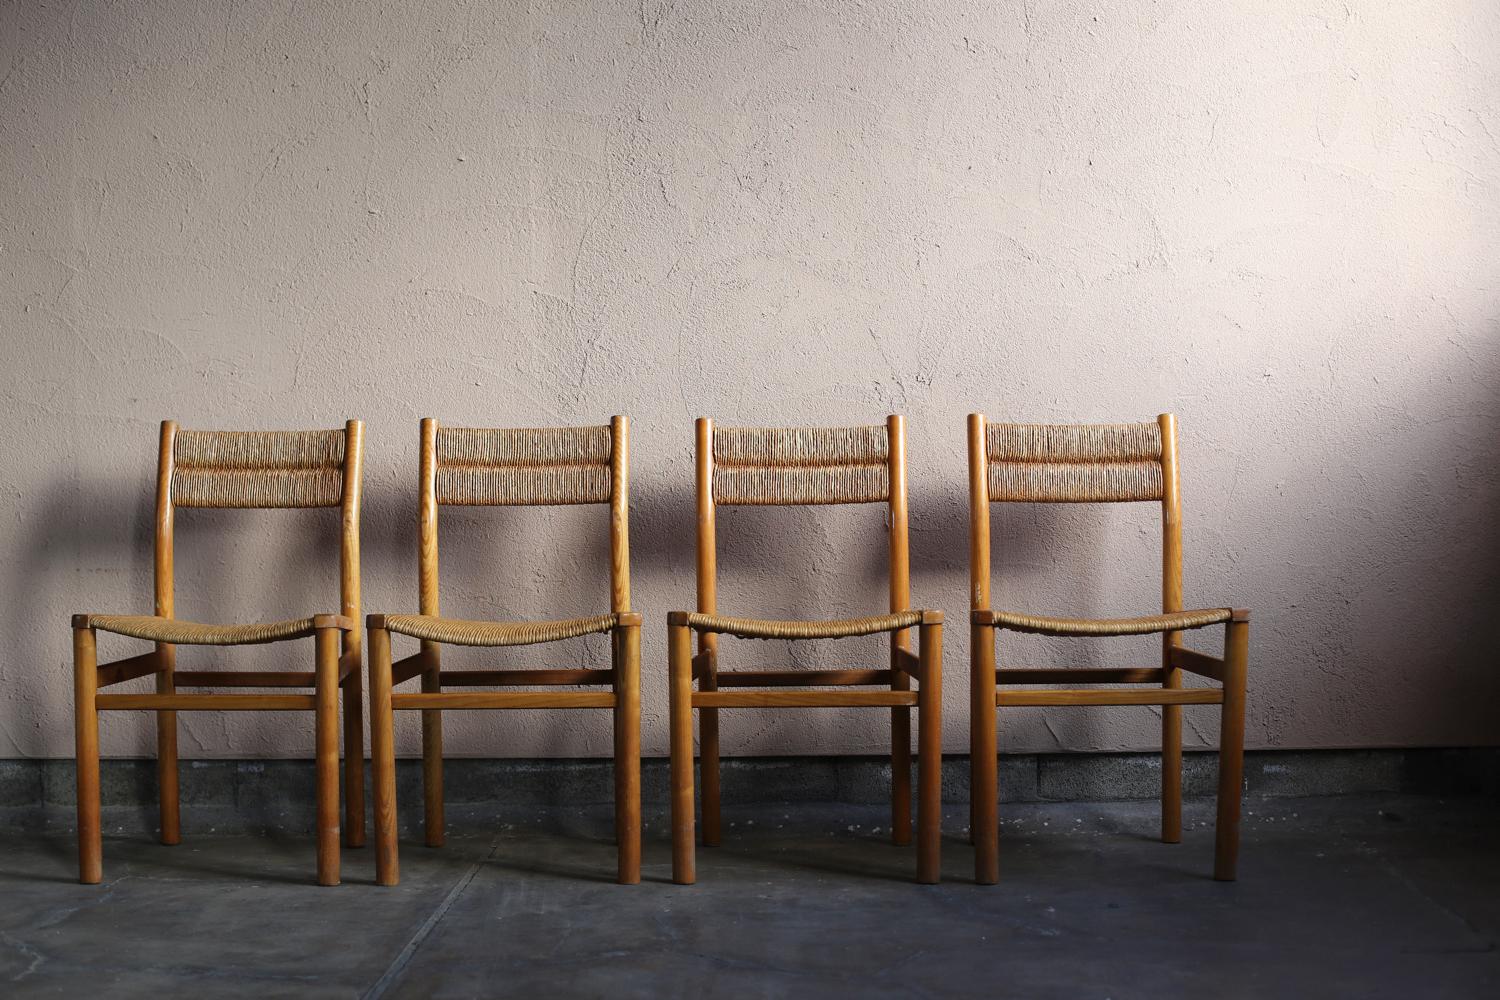 This suite of four chairs from the Week-end series was designed in the 1950s in France by designer Pierre Gautier-Delaye and then edited by Vergnere. It is made up of a structure with four log legs in ash, a seat and a backrest in woven